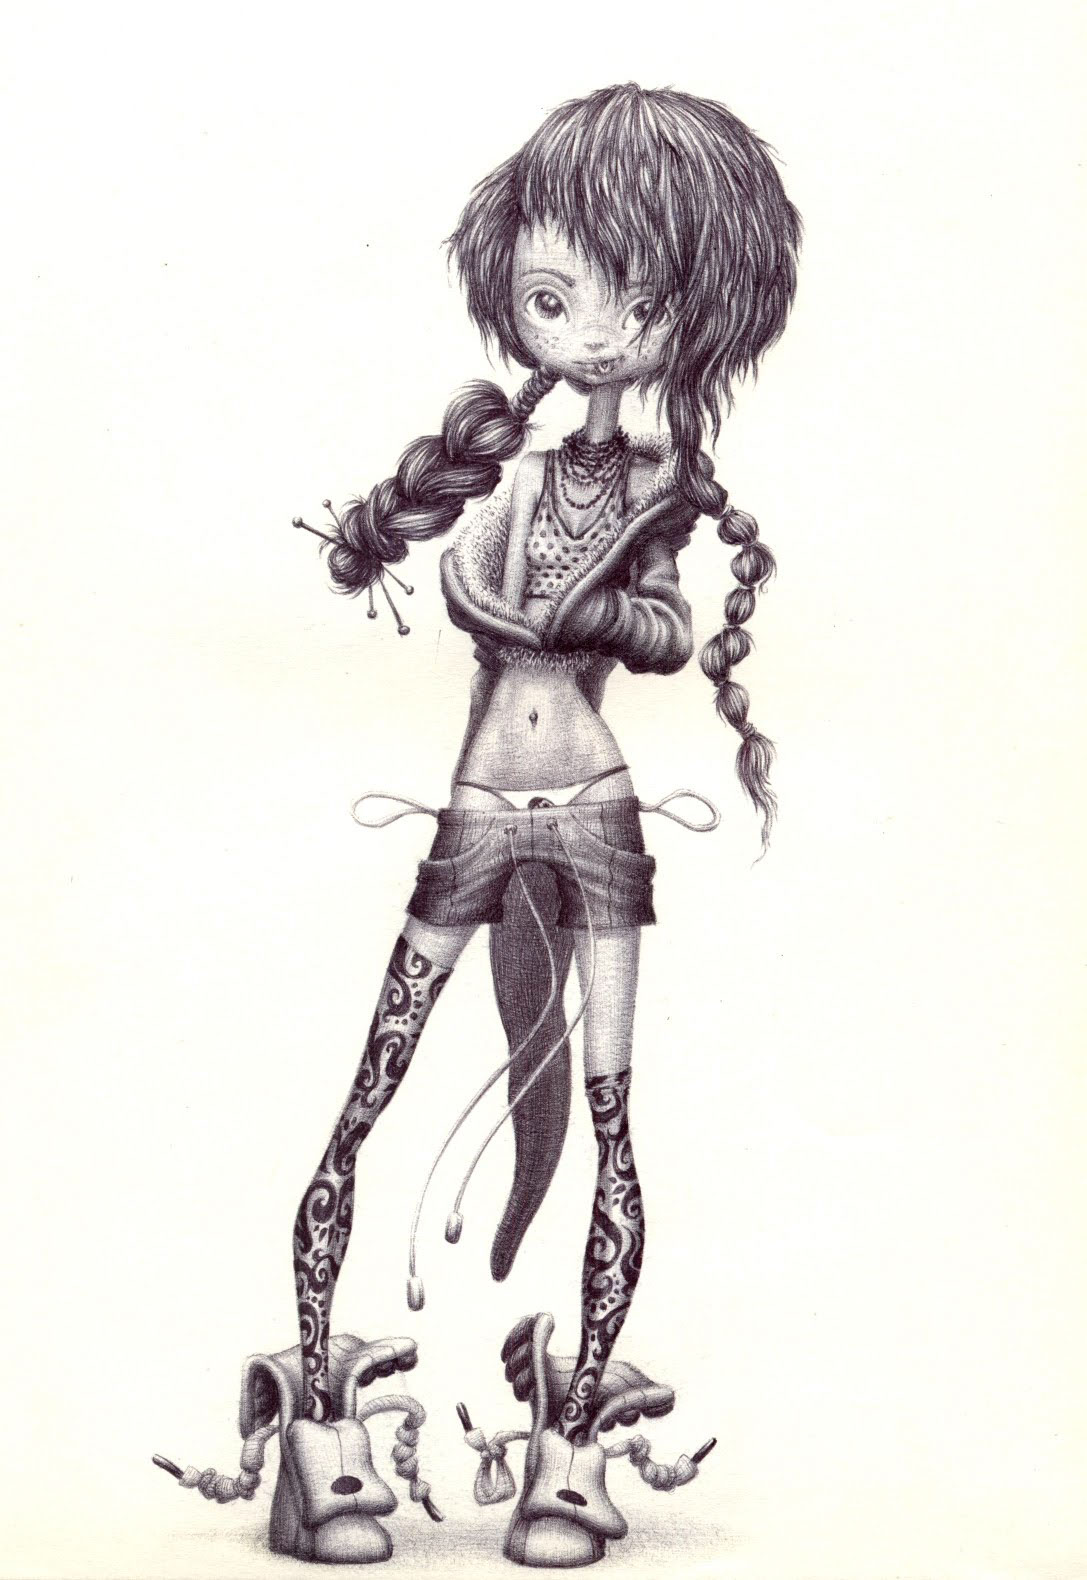 girl babe cute Hot Character design   drawing ILLUSTRATION 